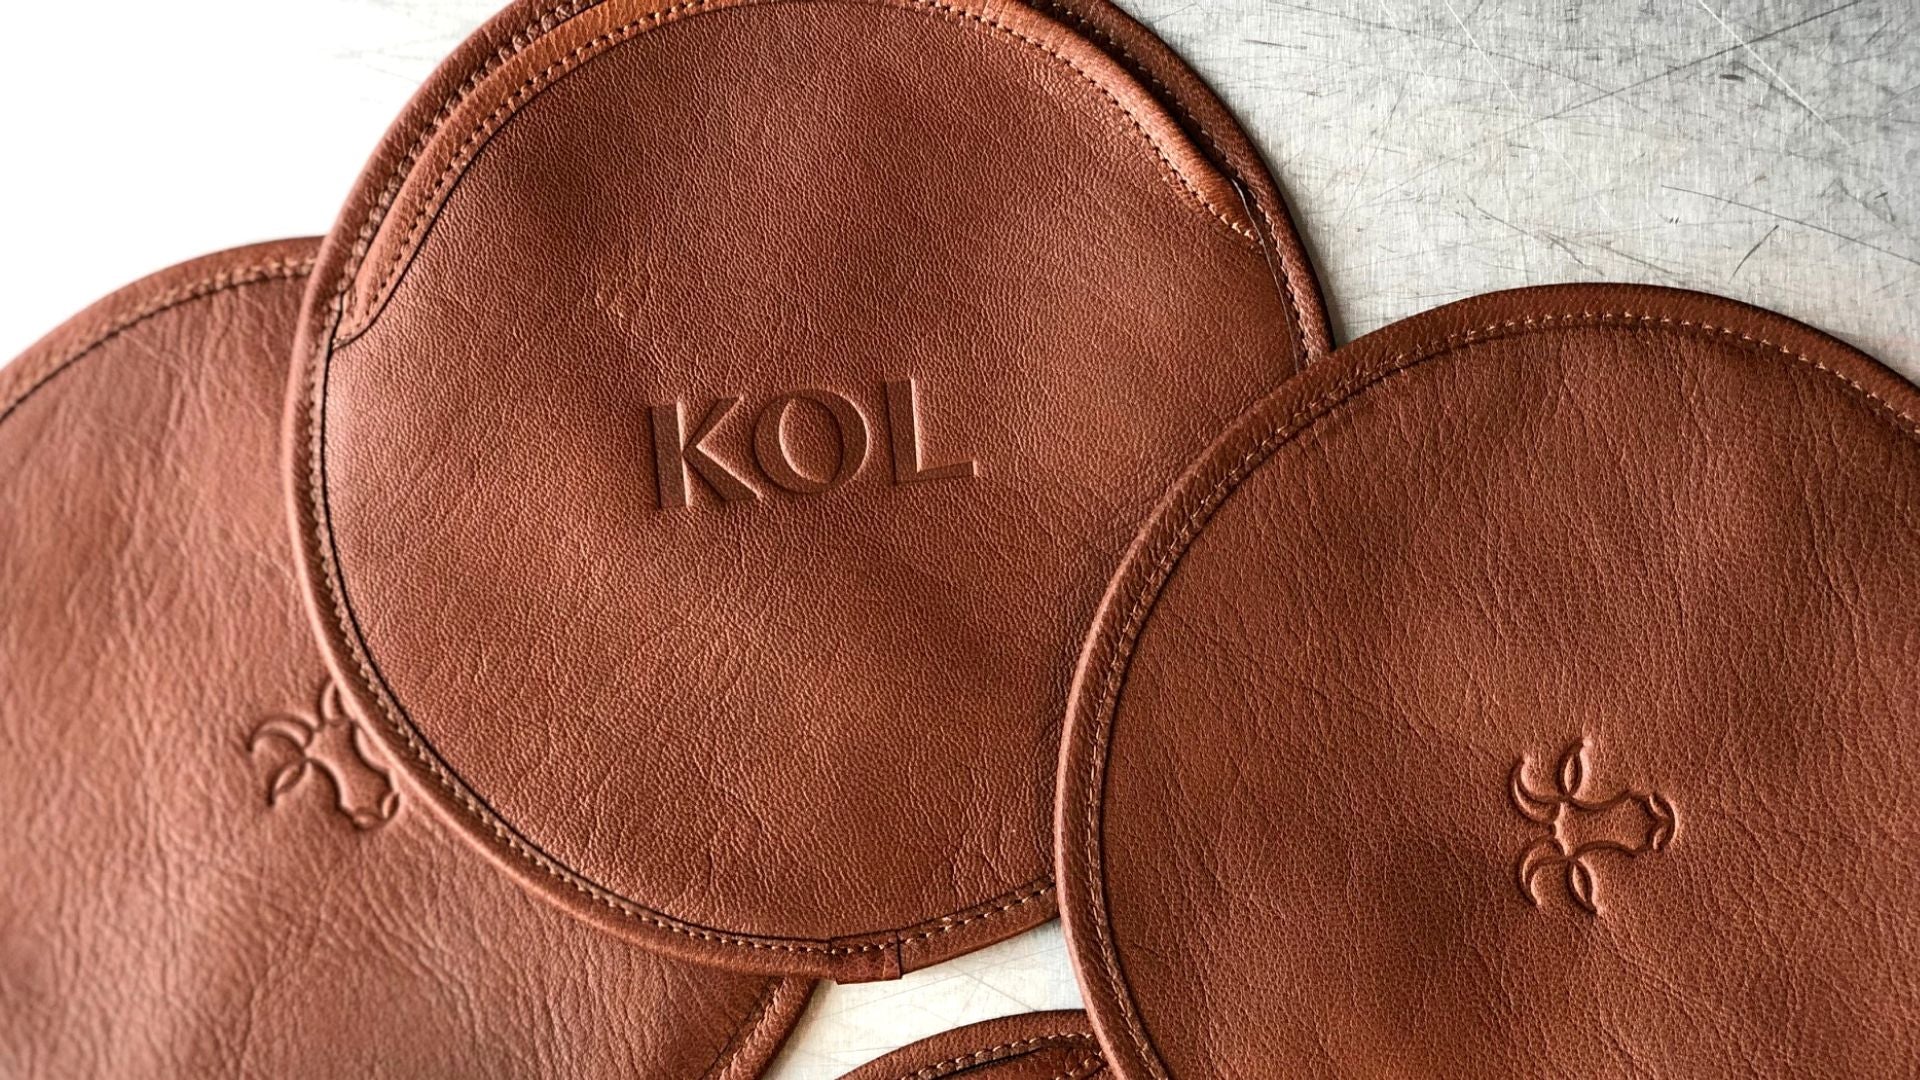 leather taco covers - Kol - Billy Tannery